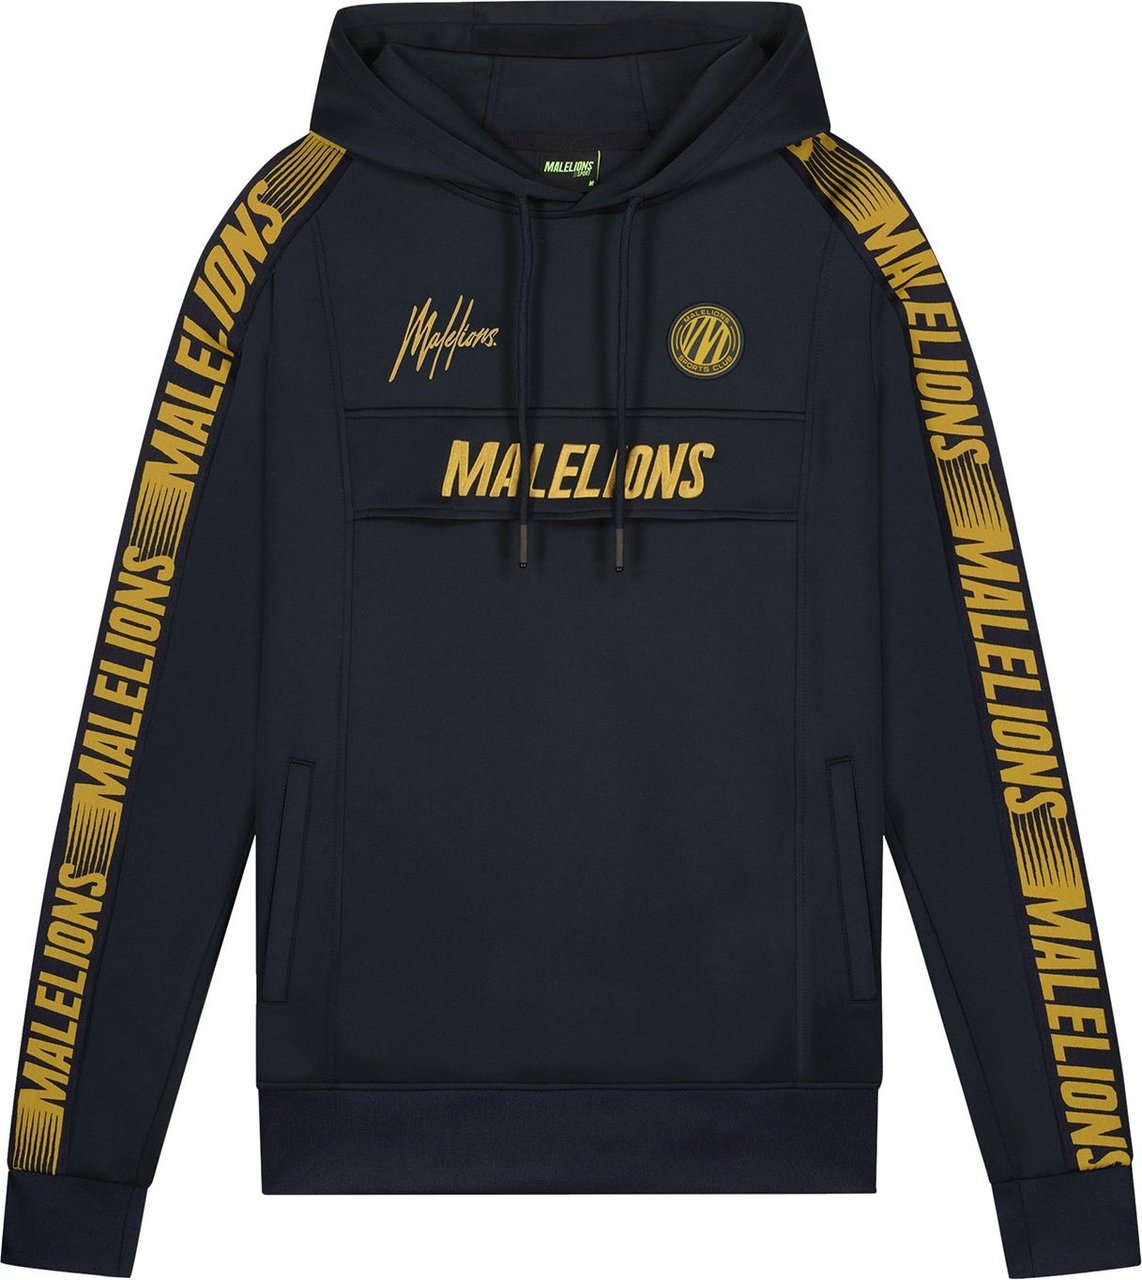 Malelions Sport Warming Up Tracksuit - Navy Blauw